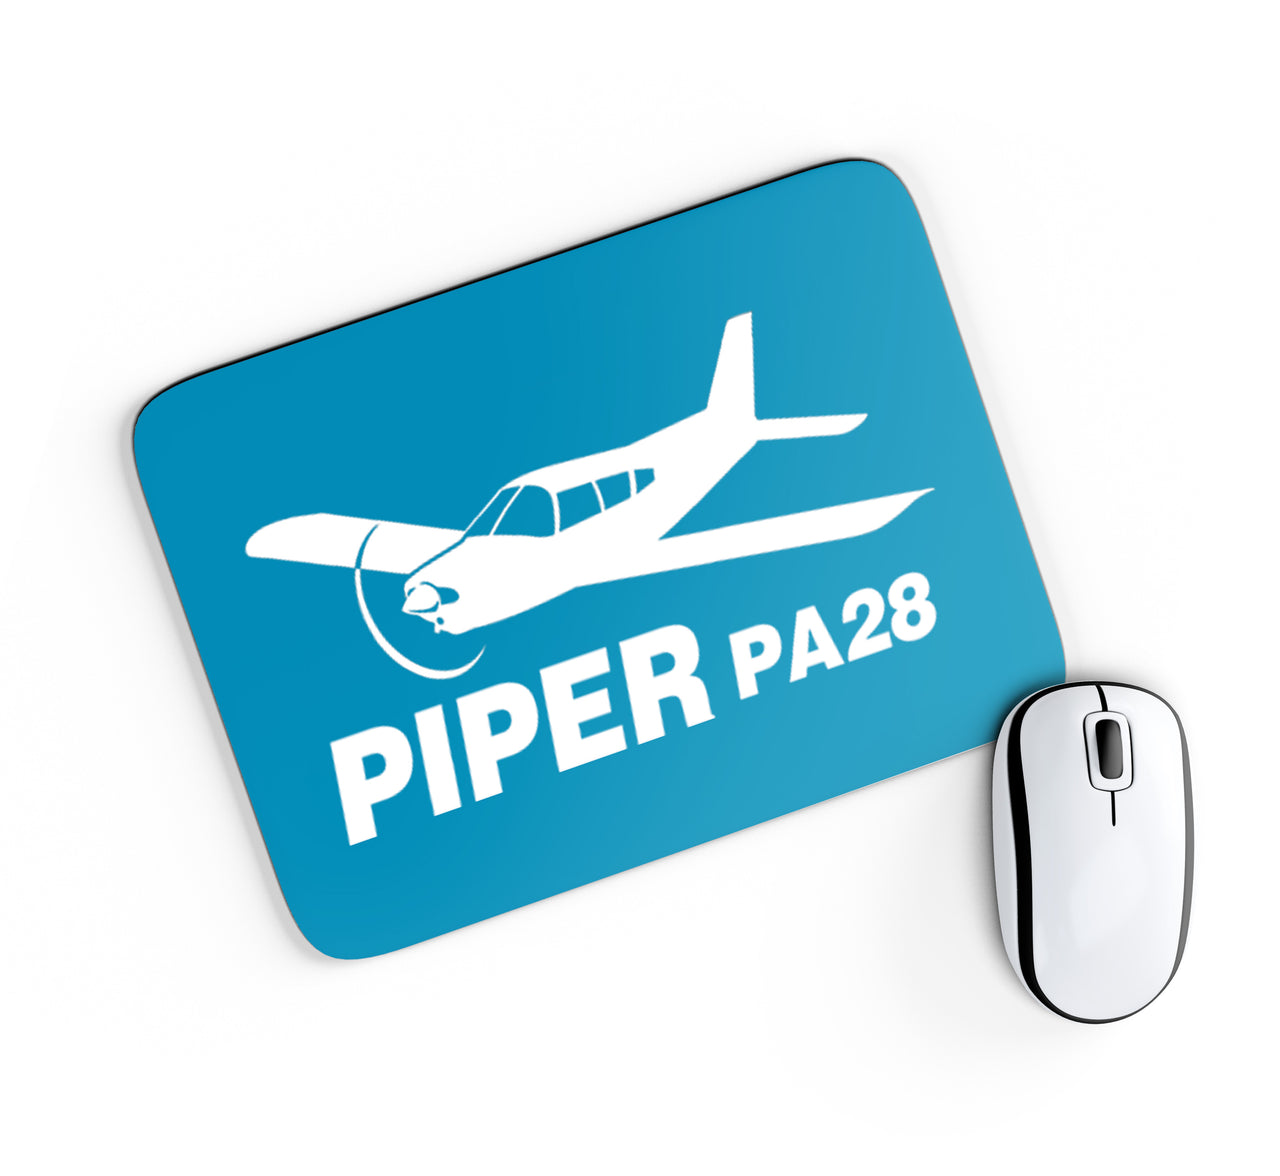 The Piper PA28 Designed Mouse Pads